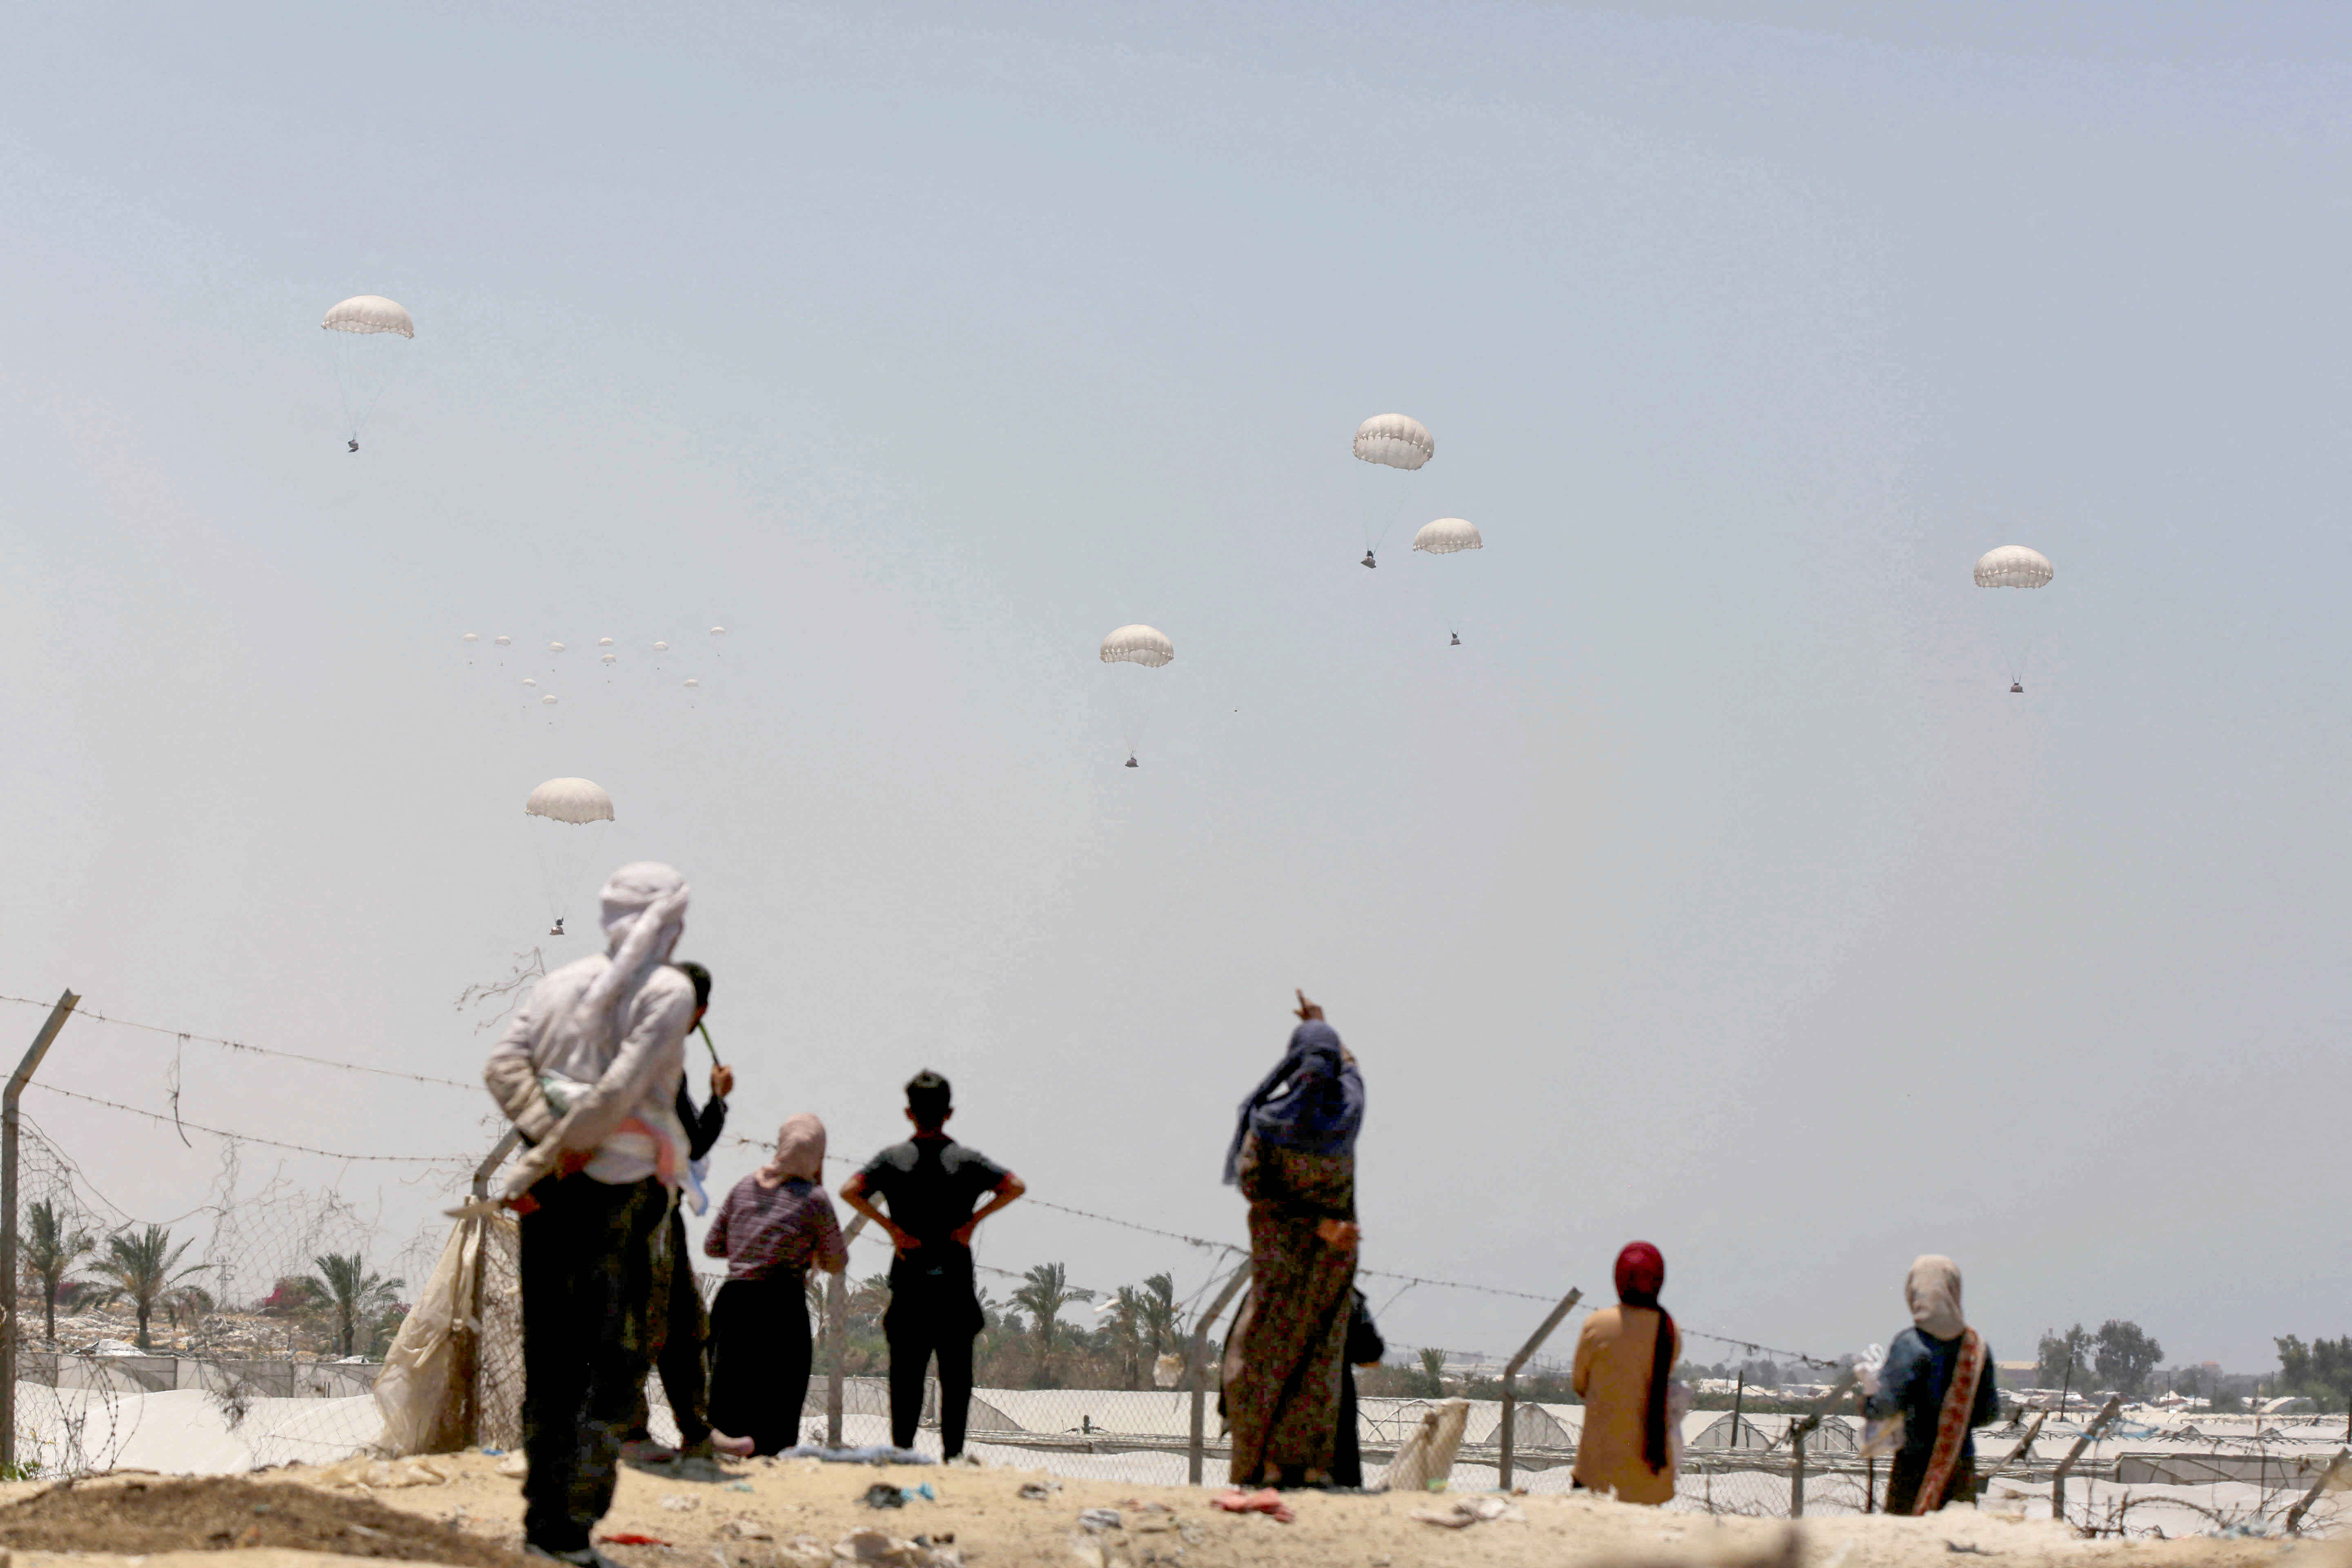 humanitarian aid packages land with the help of parachutes in Gaza